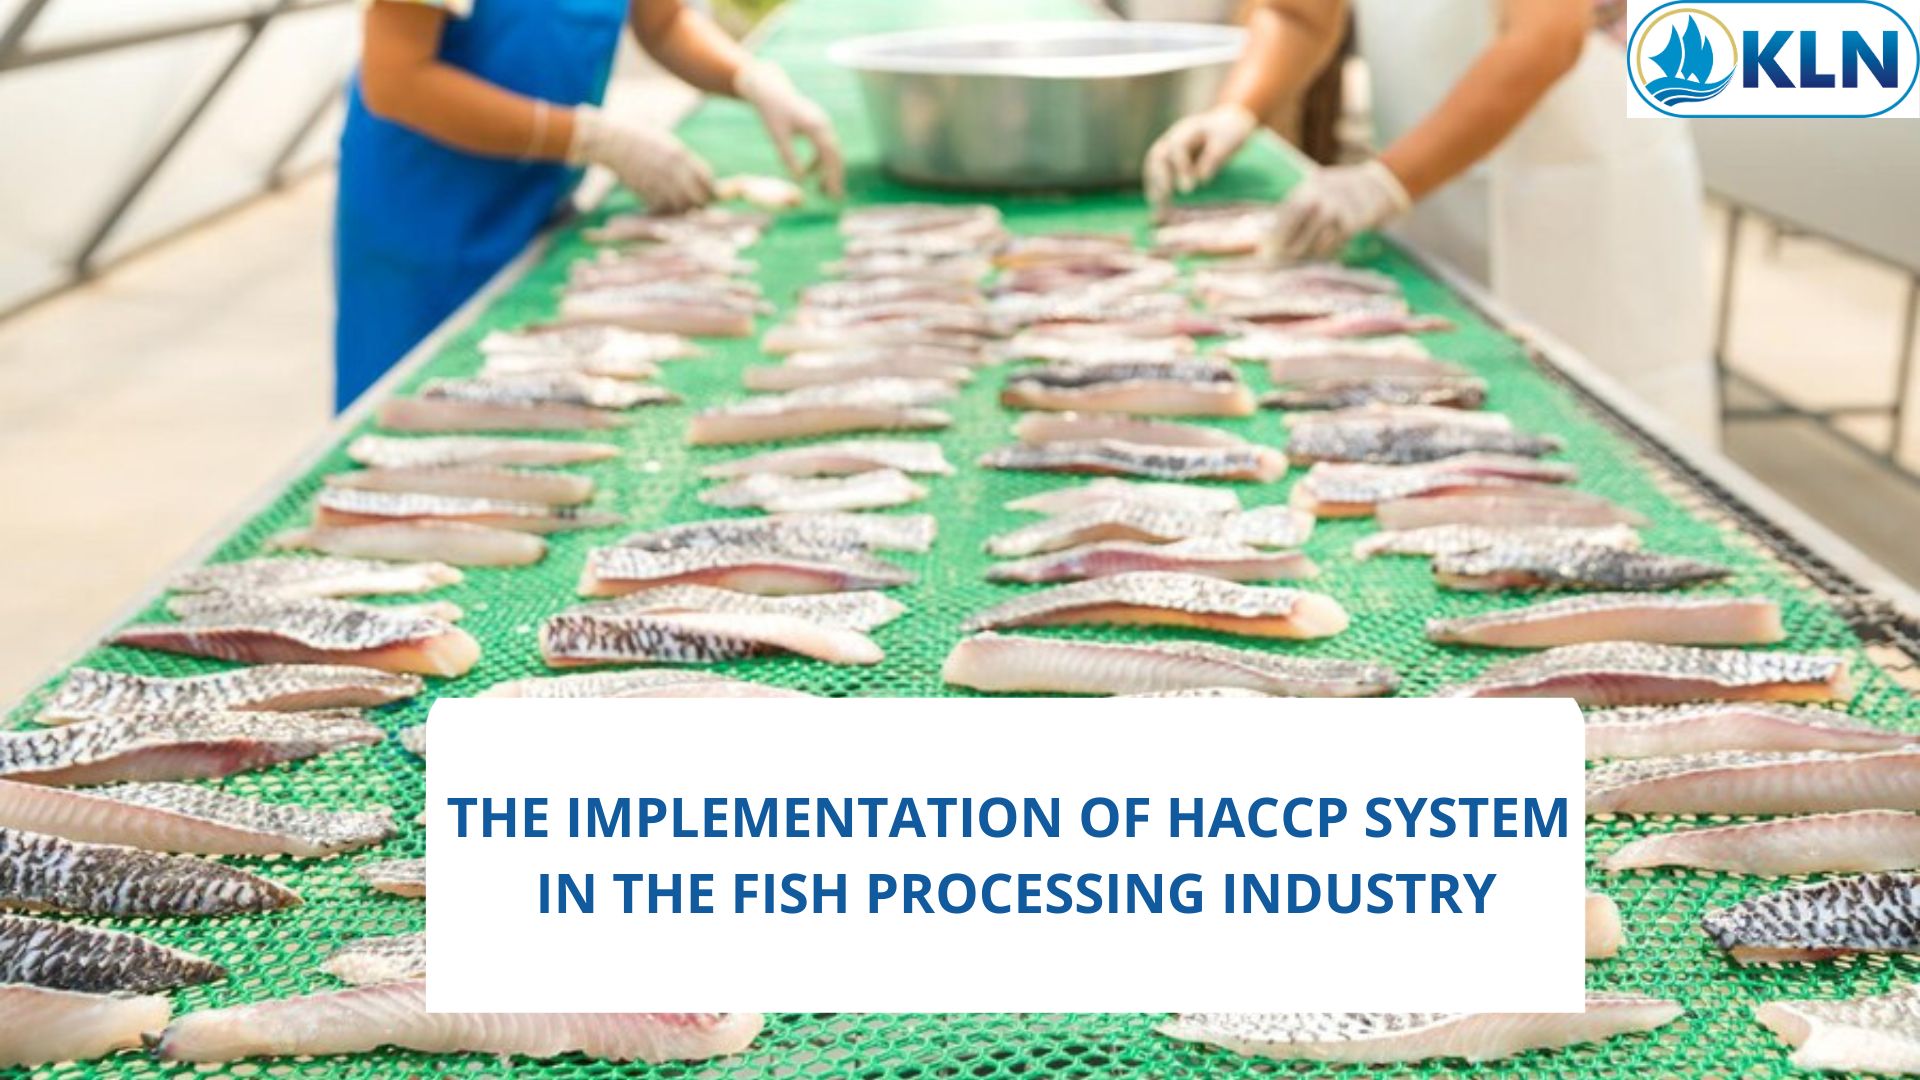 THE IMPLEMENTATION OF HACCP SYSTEM IN THE FISH PROCESSING INDUSTRY